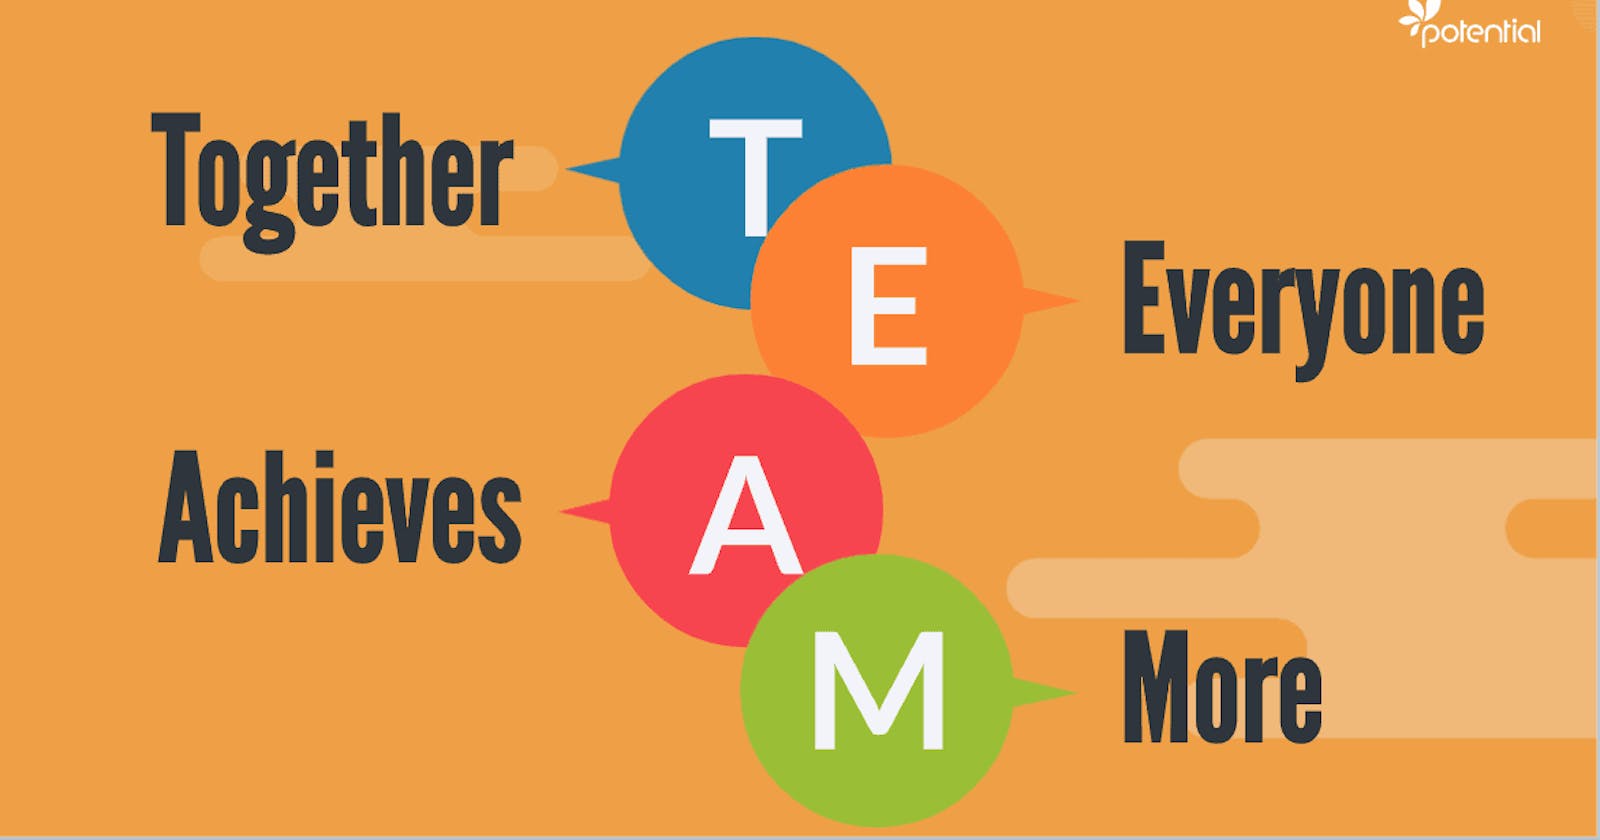 What You Do Not Know About Working Together As A Team In Programming